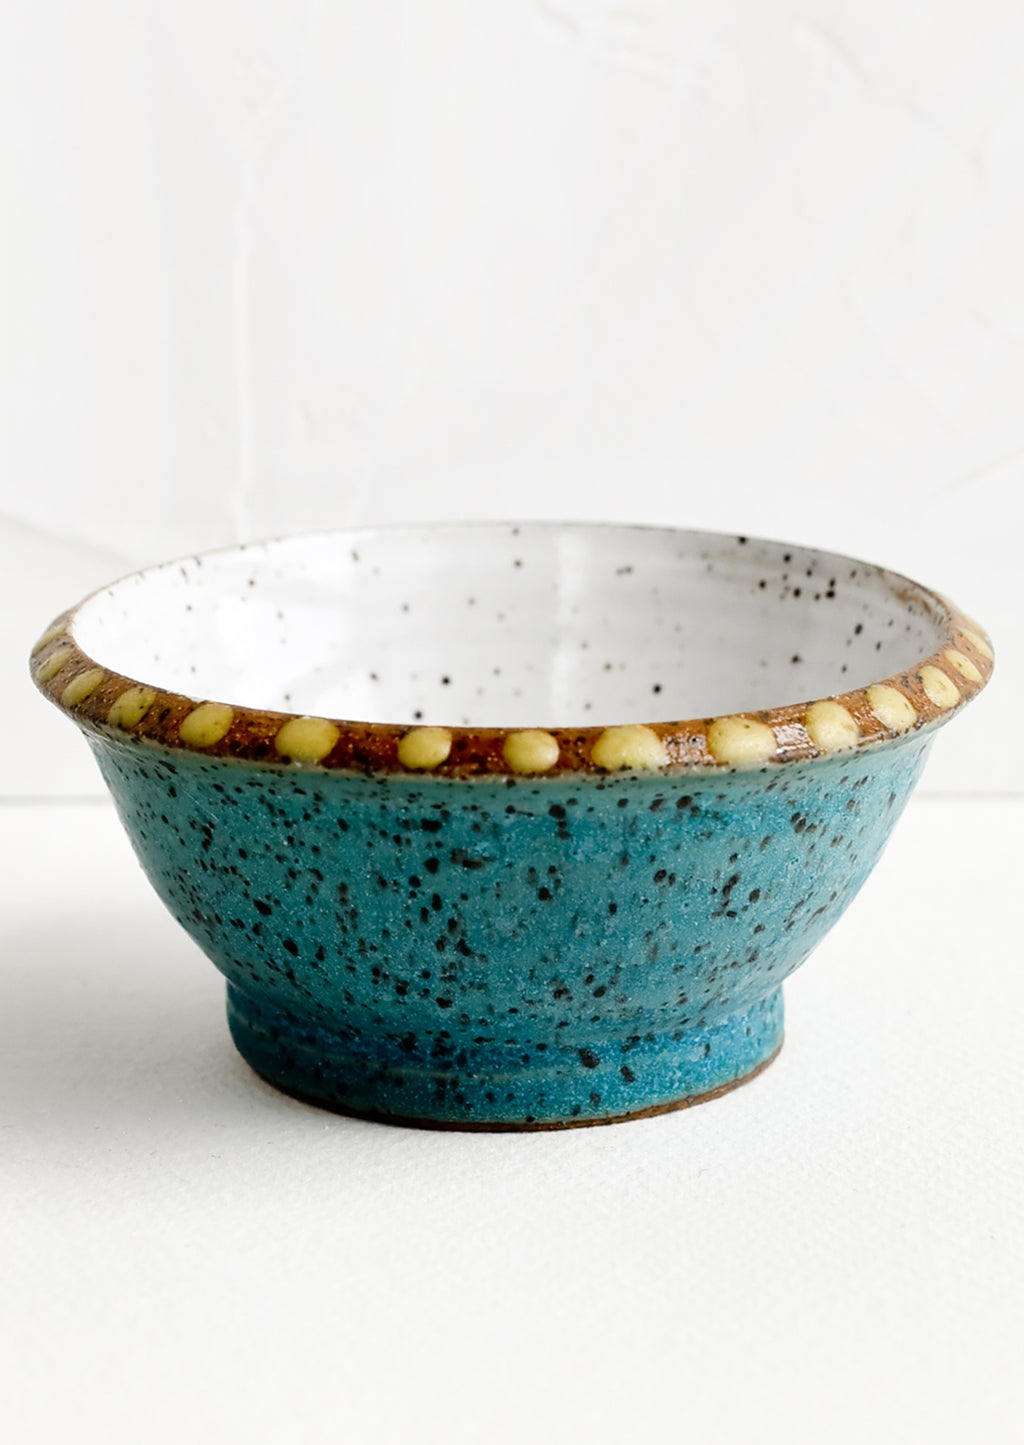 Galapagos / Ochre: A small turquoise ceramic bowl with yellow dot painted detailing.